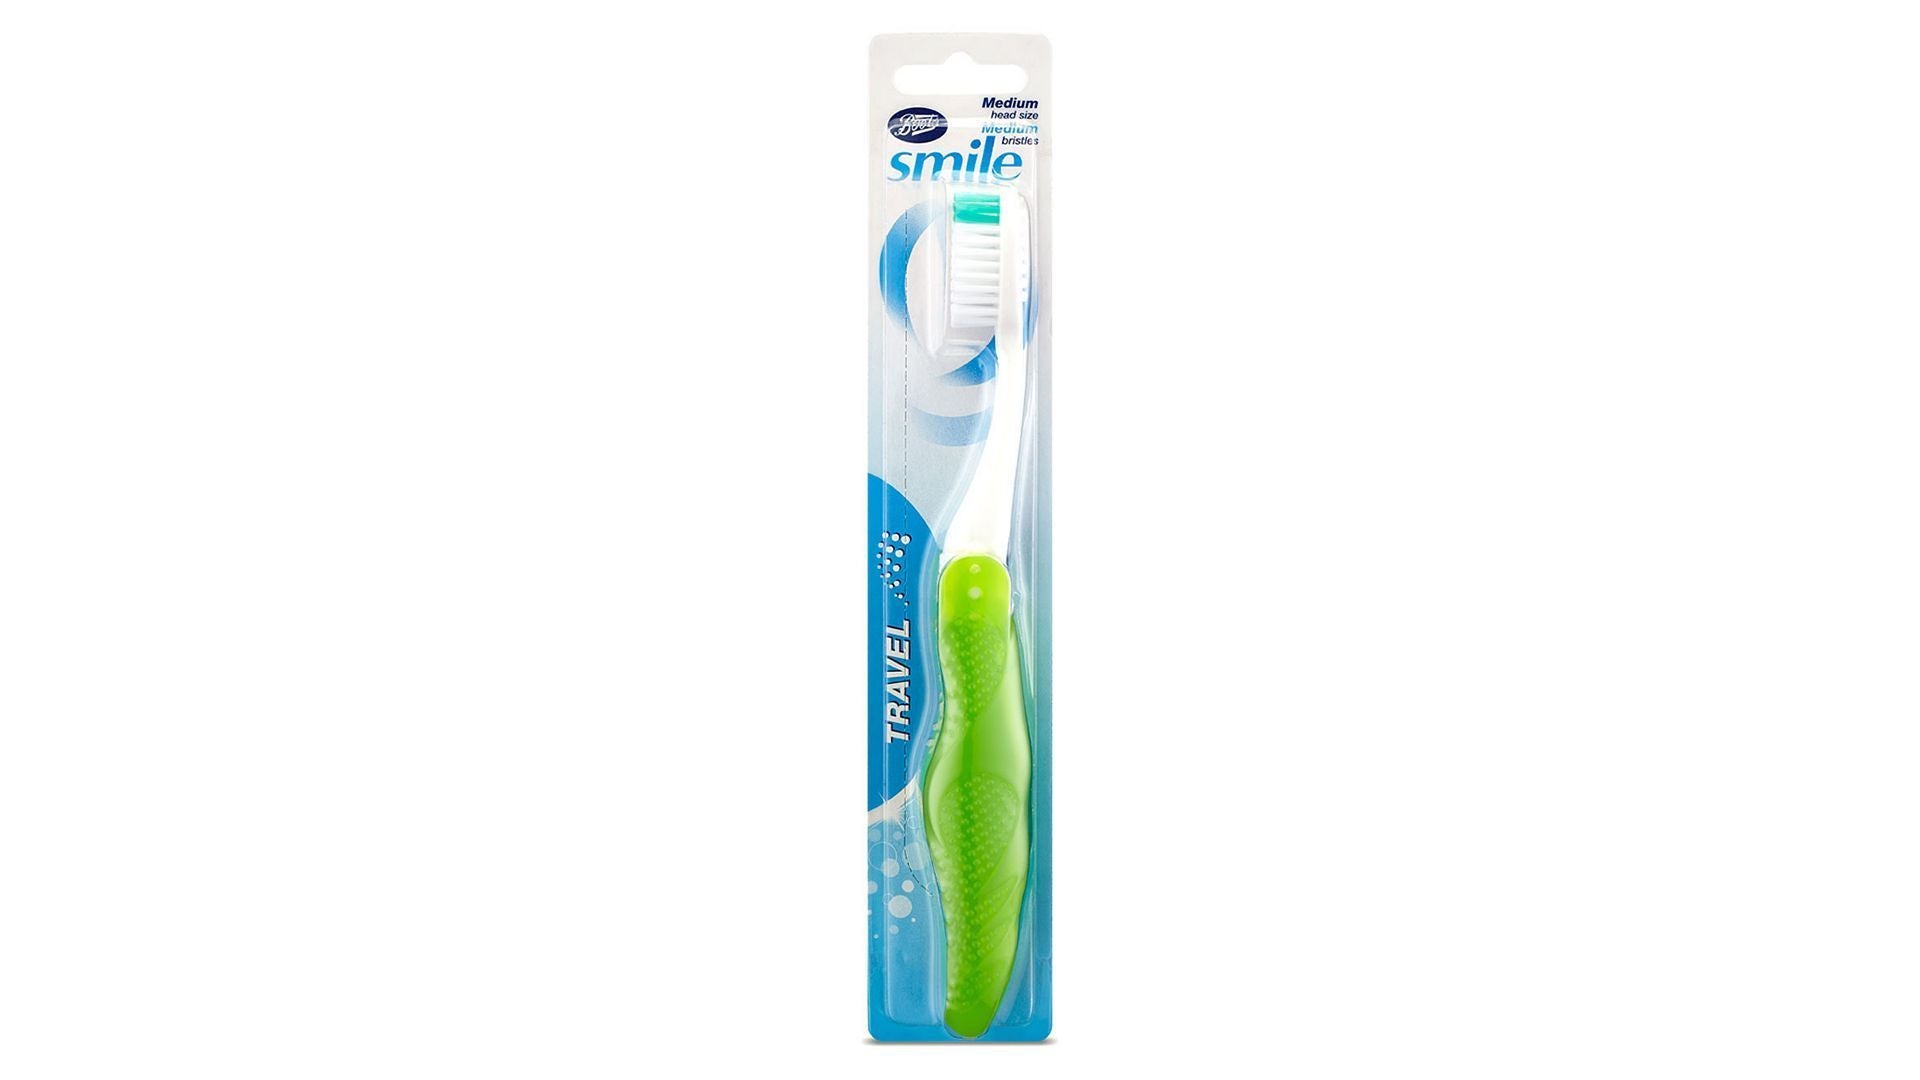 Boots Smile Travel Toothbrush | Boots KSA